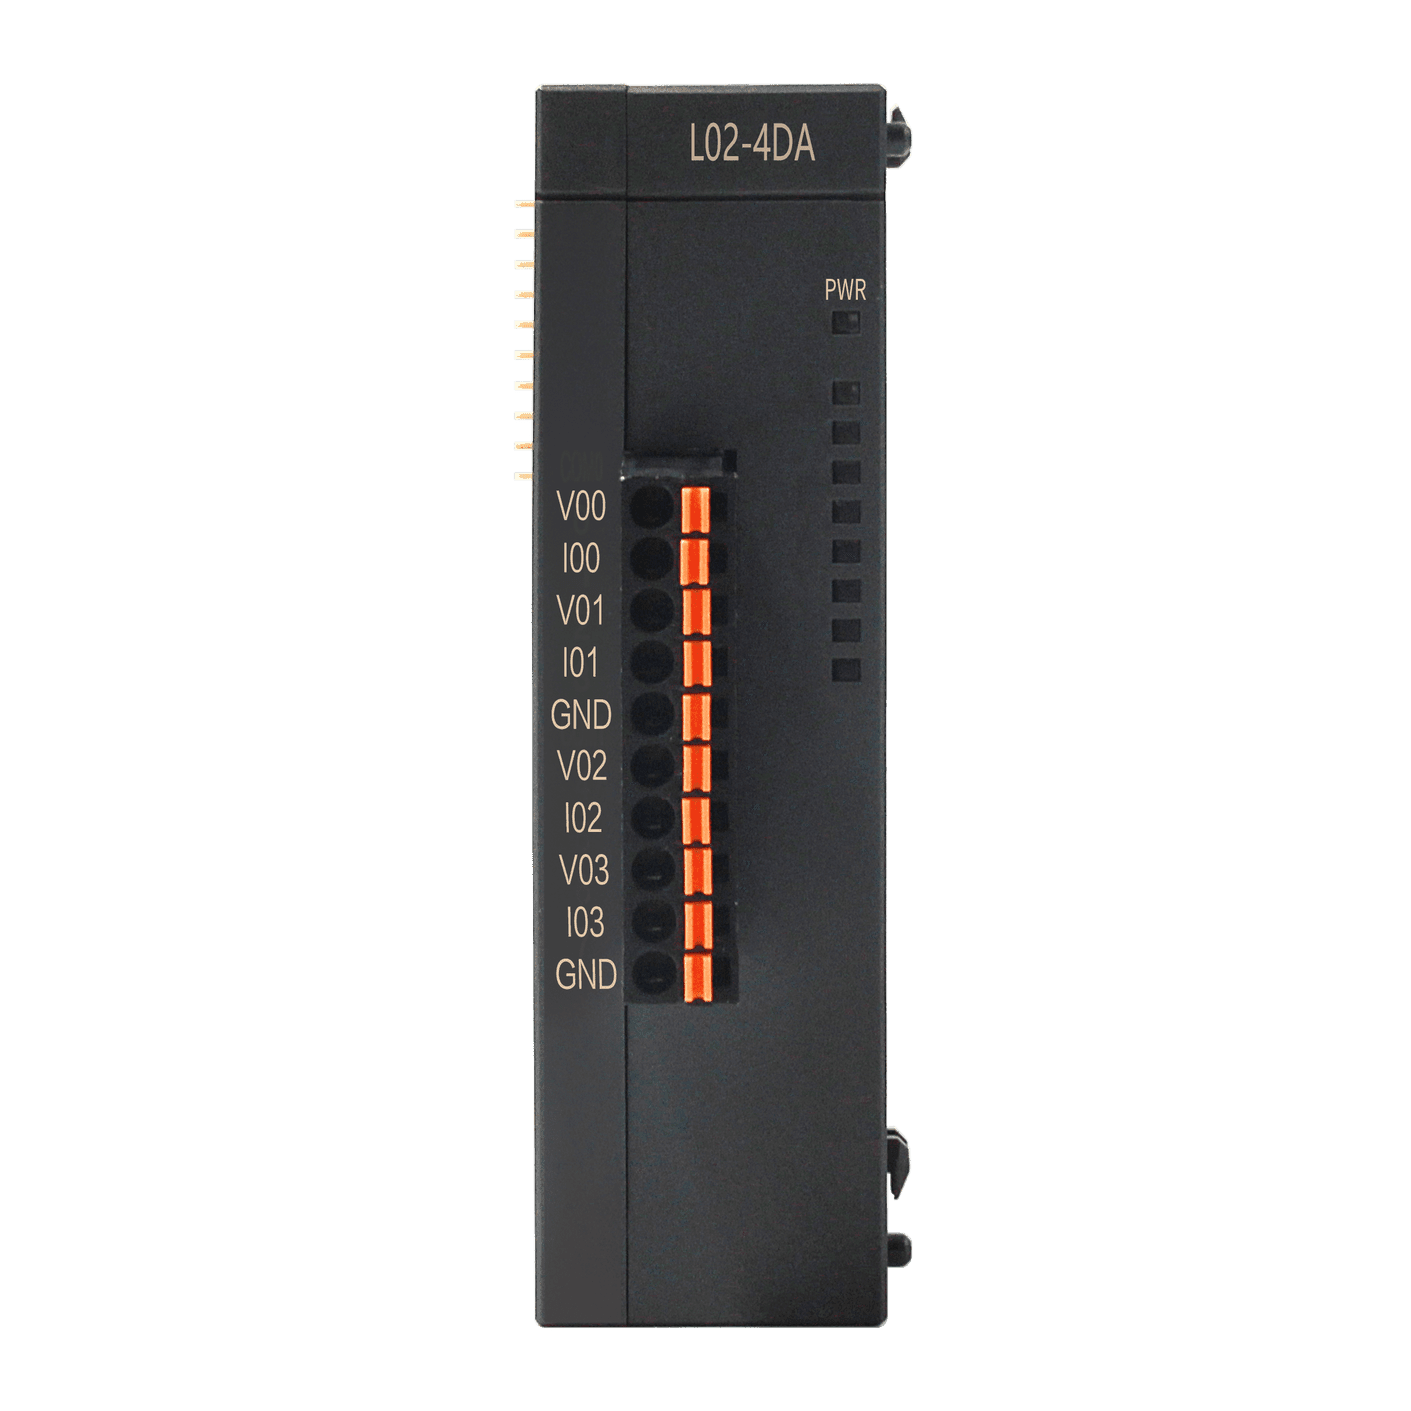 Coolmay L02 PLC modules ladder programming controller with free software.